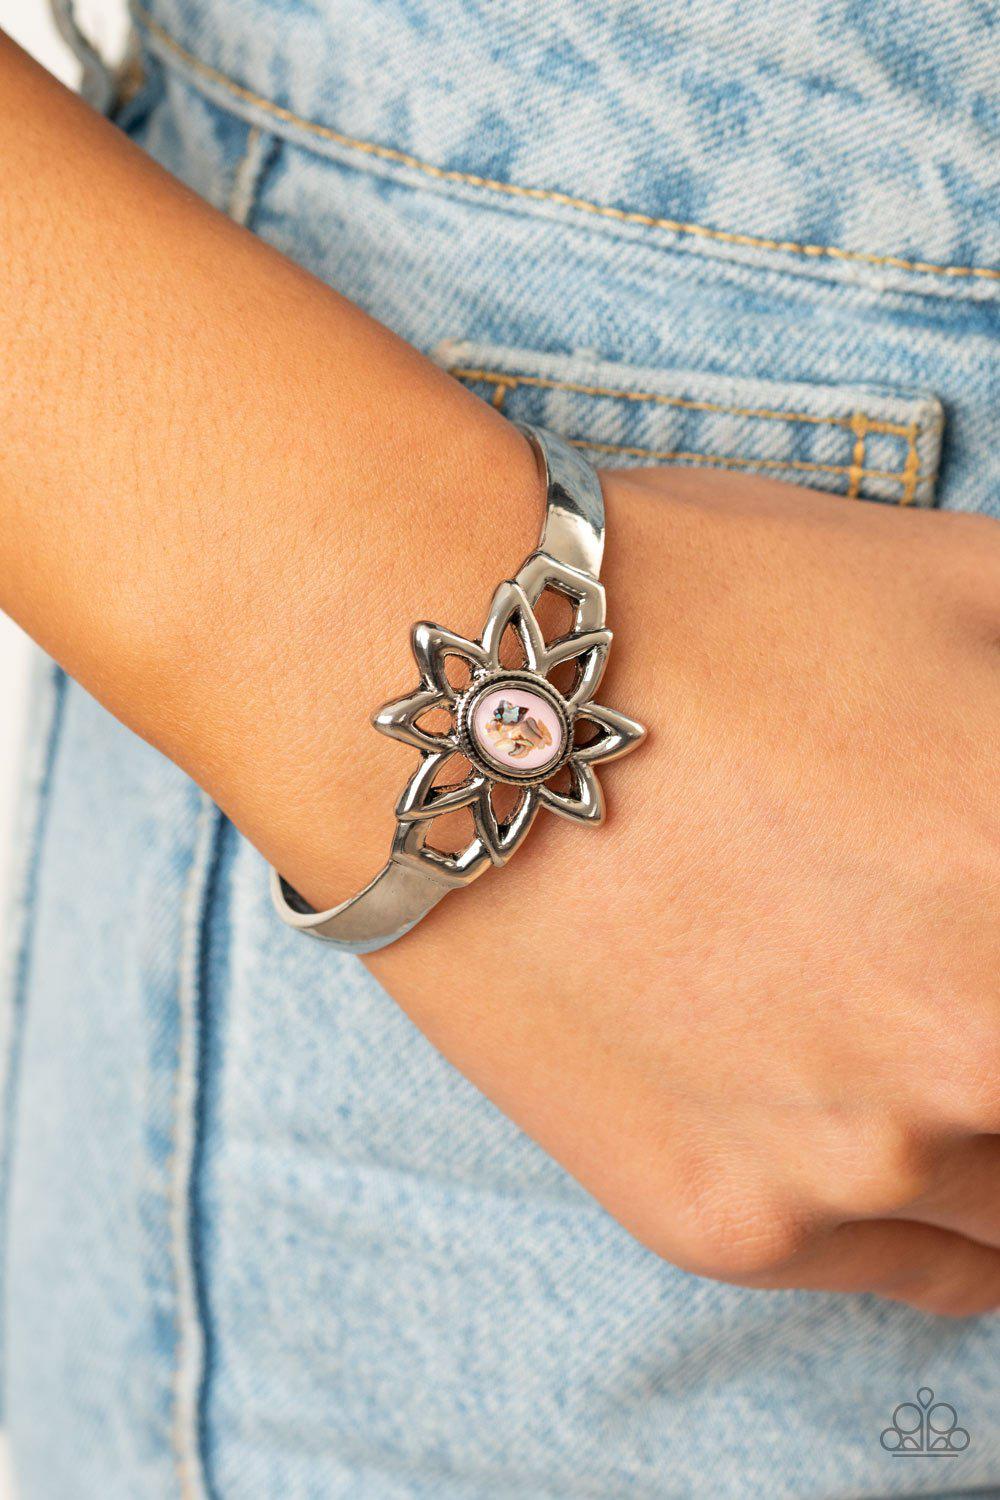 Sahara Garden Pink Shell-like Stone and Silver Cuff Flower Bracelet - Paparazzi Accessories - lightbox -CarasShop.com - $5 Jewelry by Cara Jewels